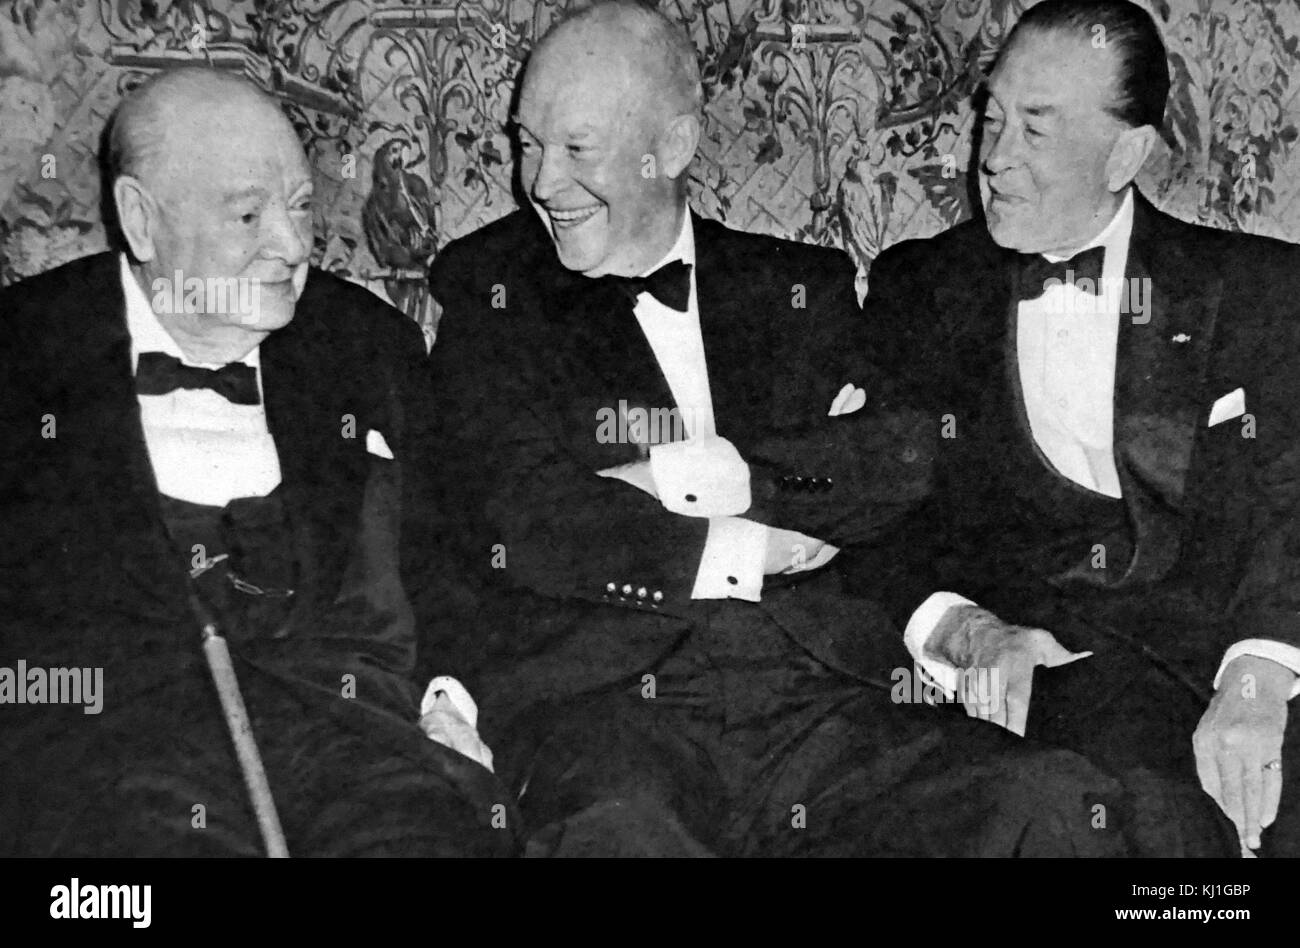 Sir Winston Churchill with President Dwight David Eisenhower and Field Marshal Lord Alexander of Tunis 1959. Sir Winston Churchill (1874 – 1965) was a British statesman who was the Prime Minister of the United Kingdom from 1940 to 1945 and again from 1951 to 1955. Stock Photo